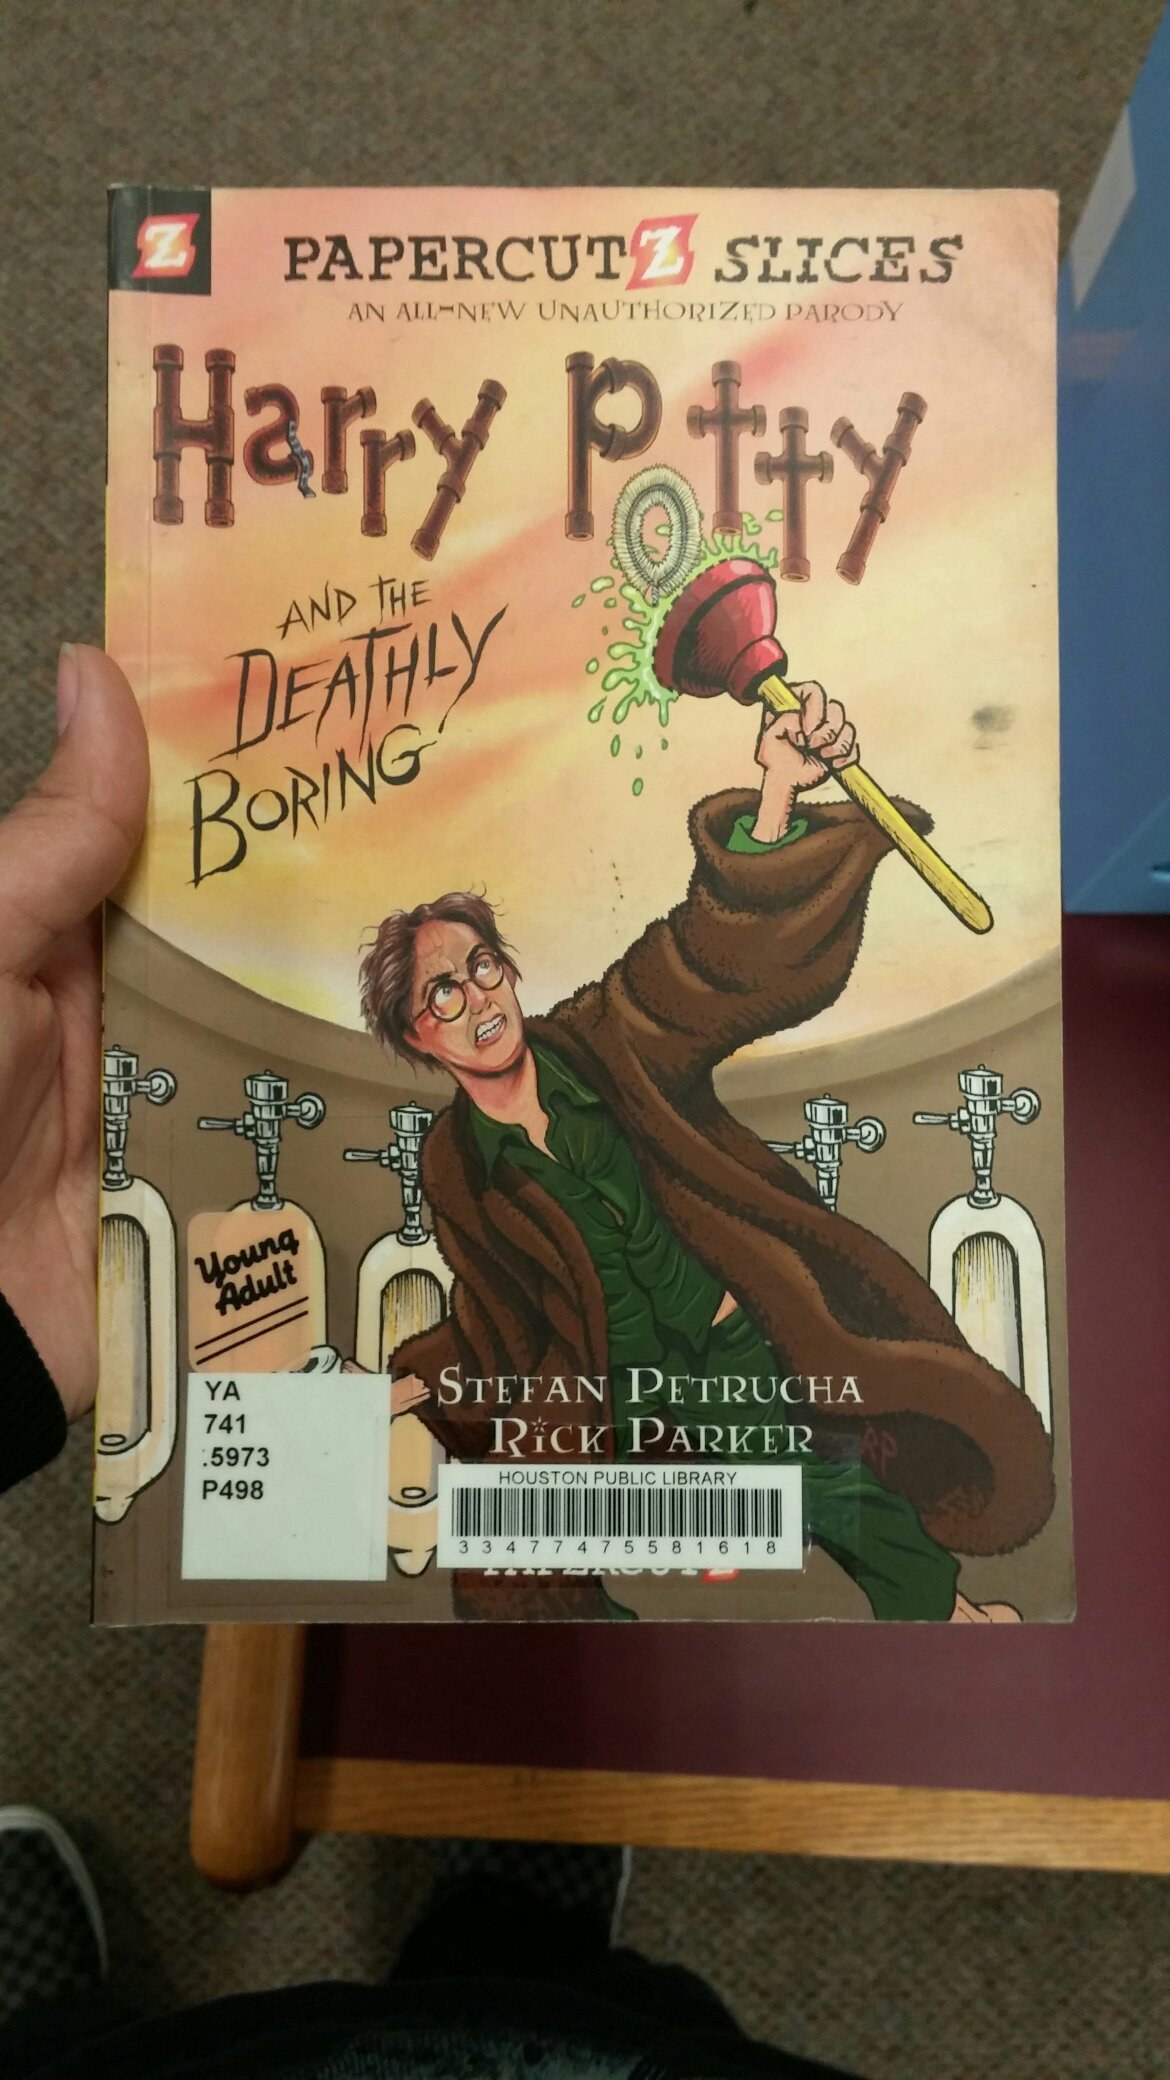 Found this at my library - meme